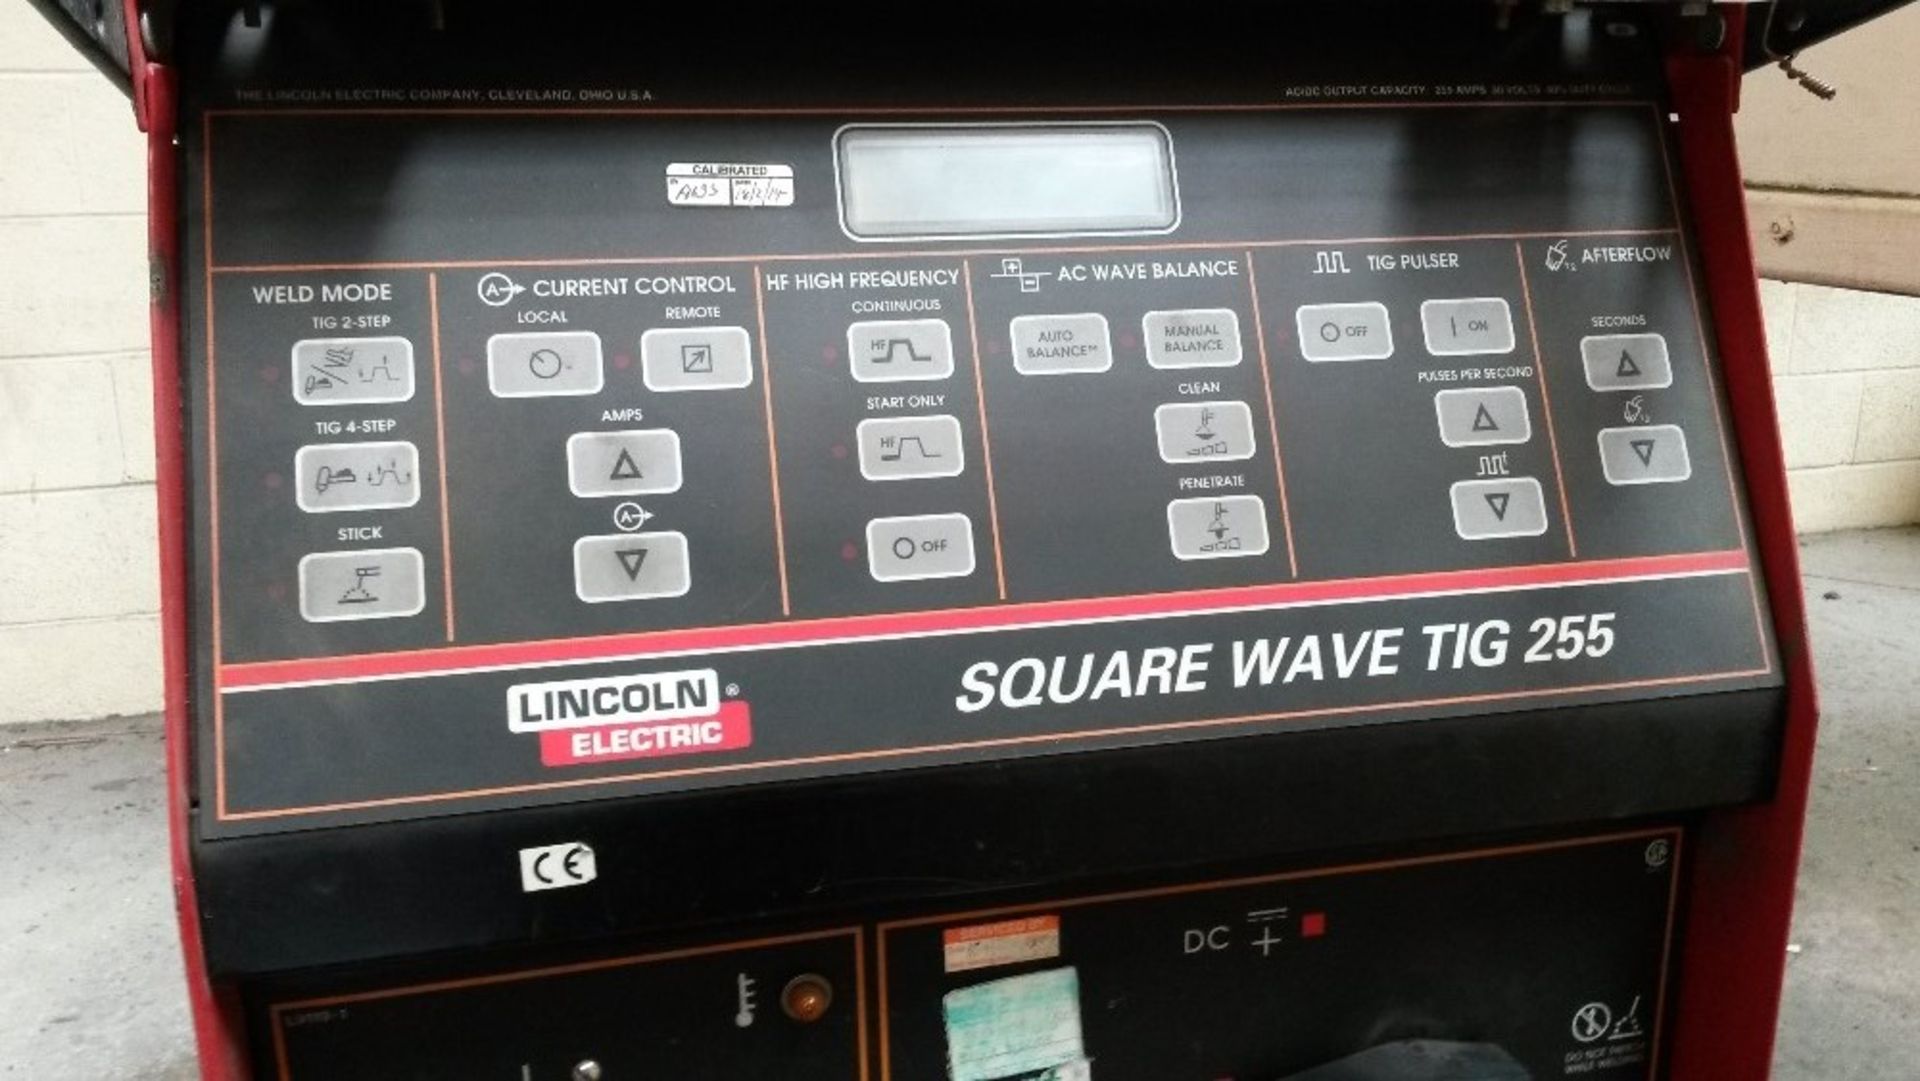 Lincoln 3 Phase electric Square Wave Tig Welder 255, has been used till last week - Image 2 of 3